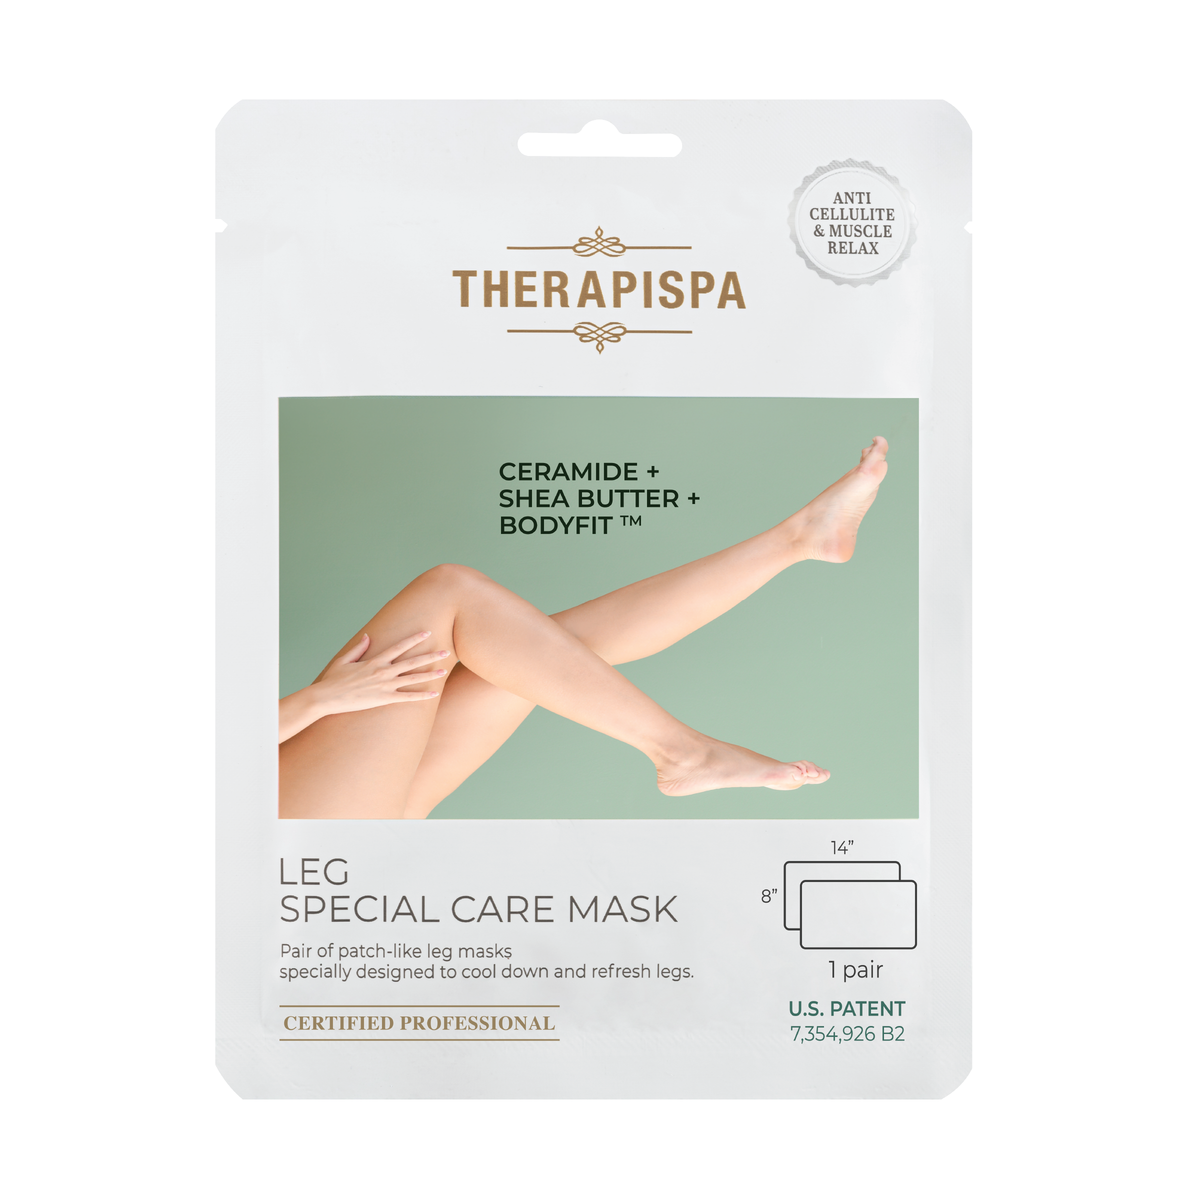 Leg Special Care Mask (1 Pair)